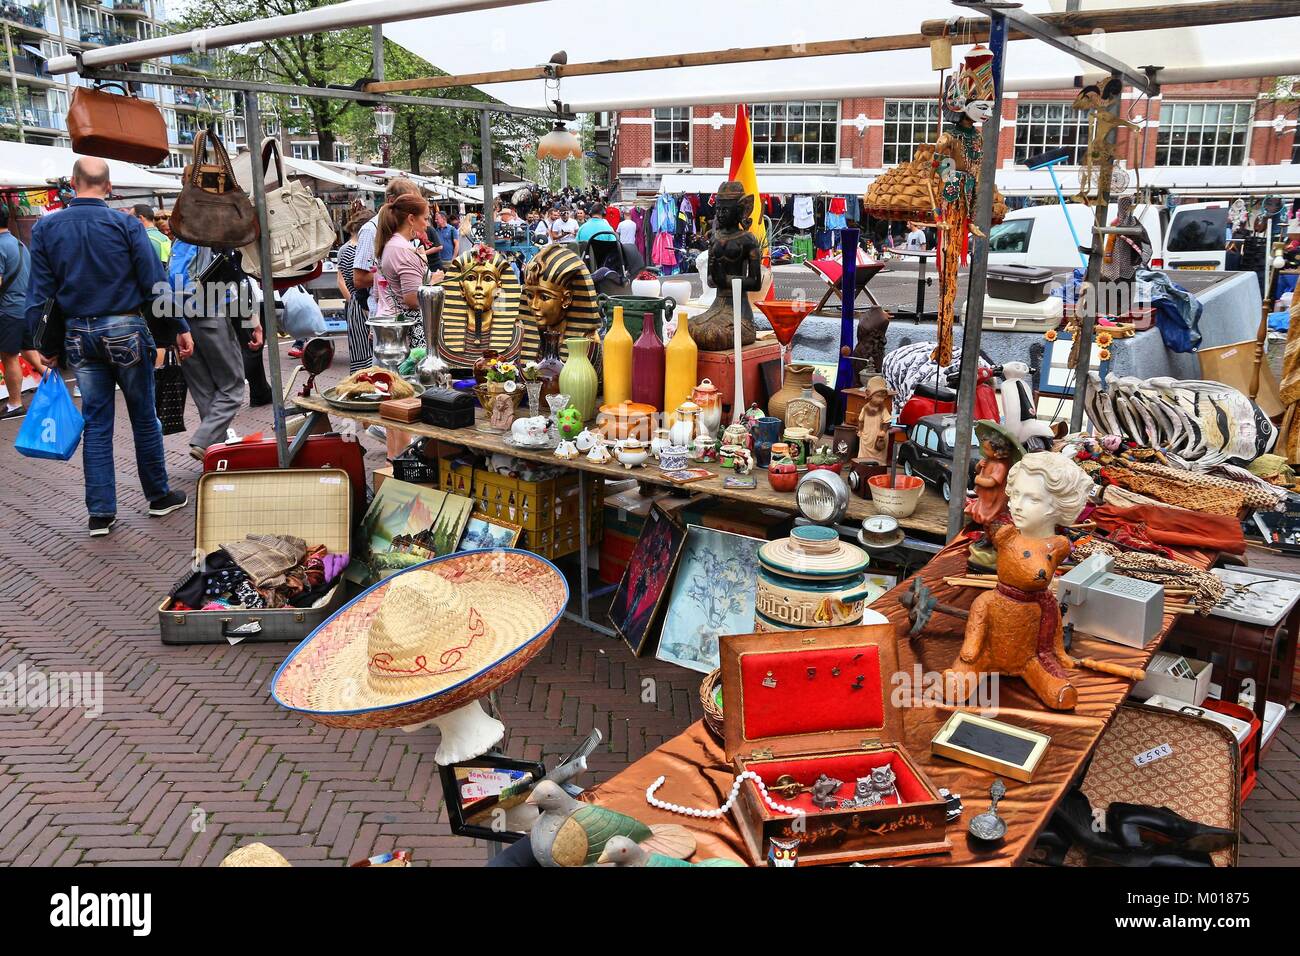 AMSTERDAM, NETHERLANDS - JULY 8, 2017: People visit Waterlooplein Market in Amsterdam, Netherlands. The popular flea market has up to 300 stalls. Stock Photo